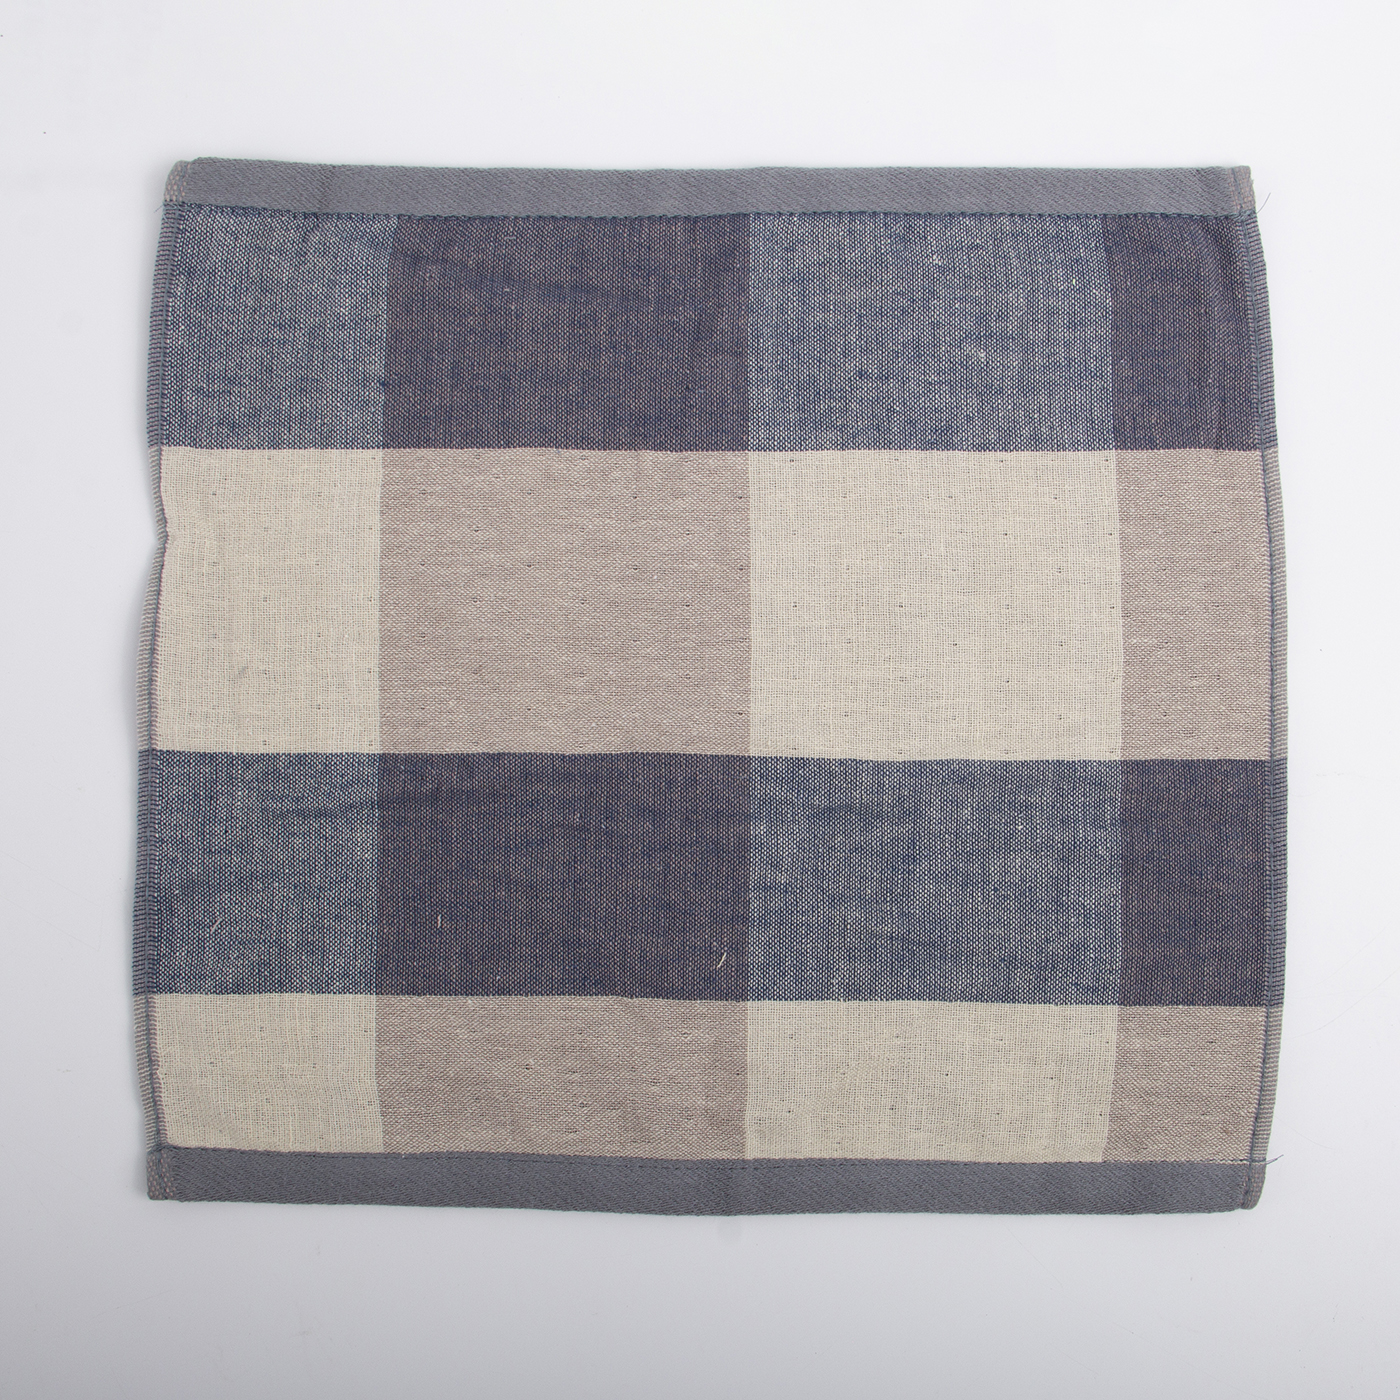 Checked Cotton Hand Towel4